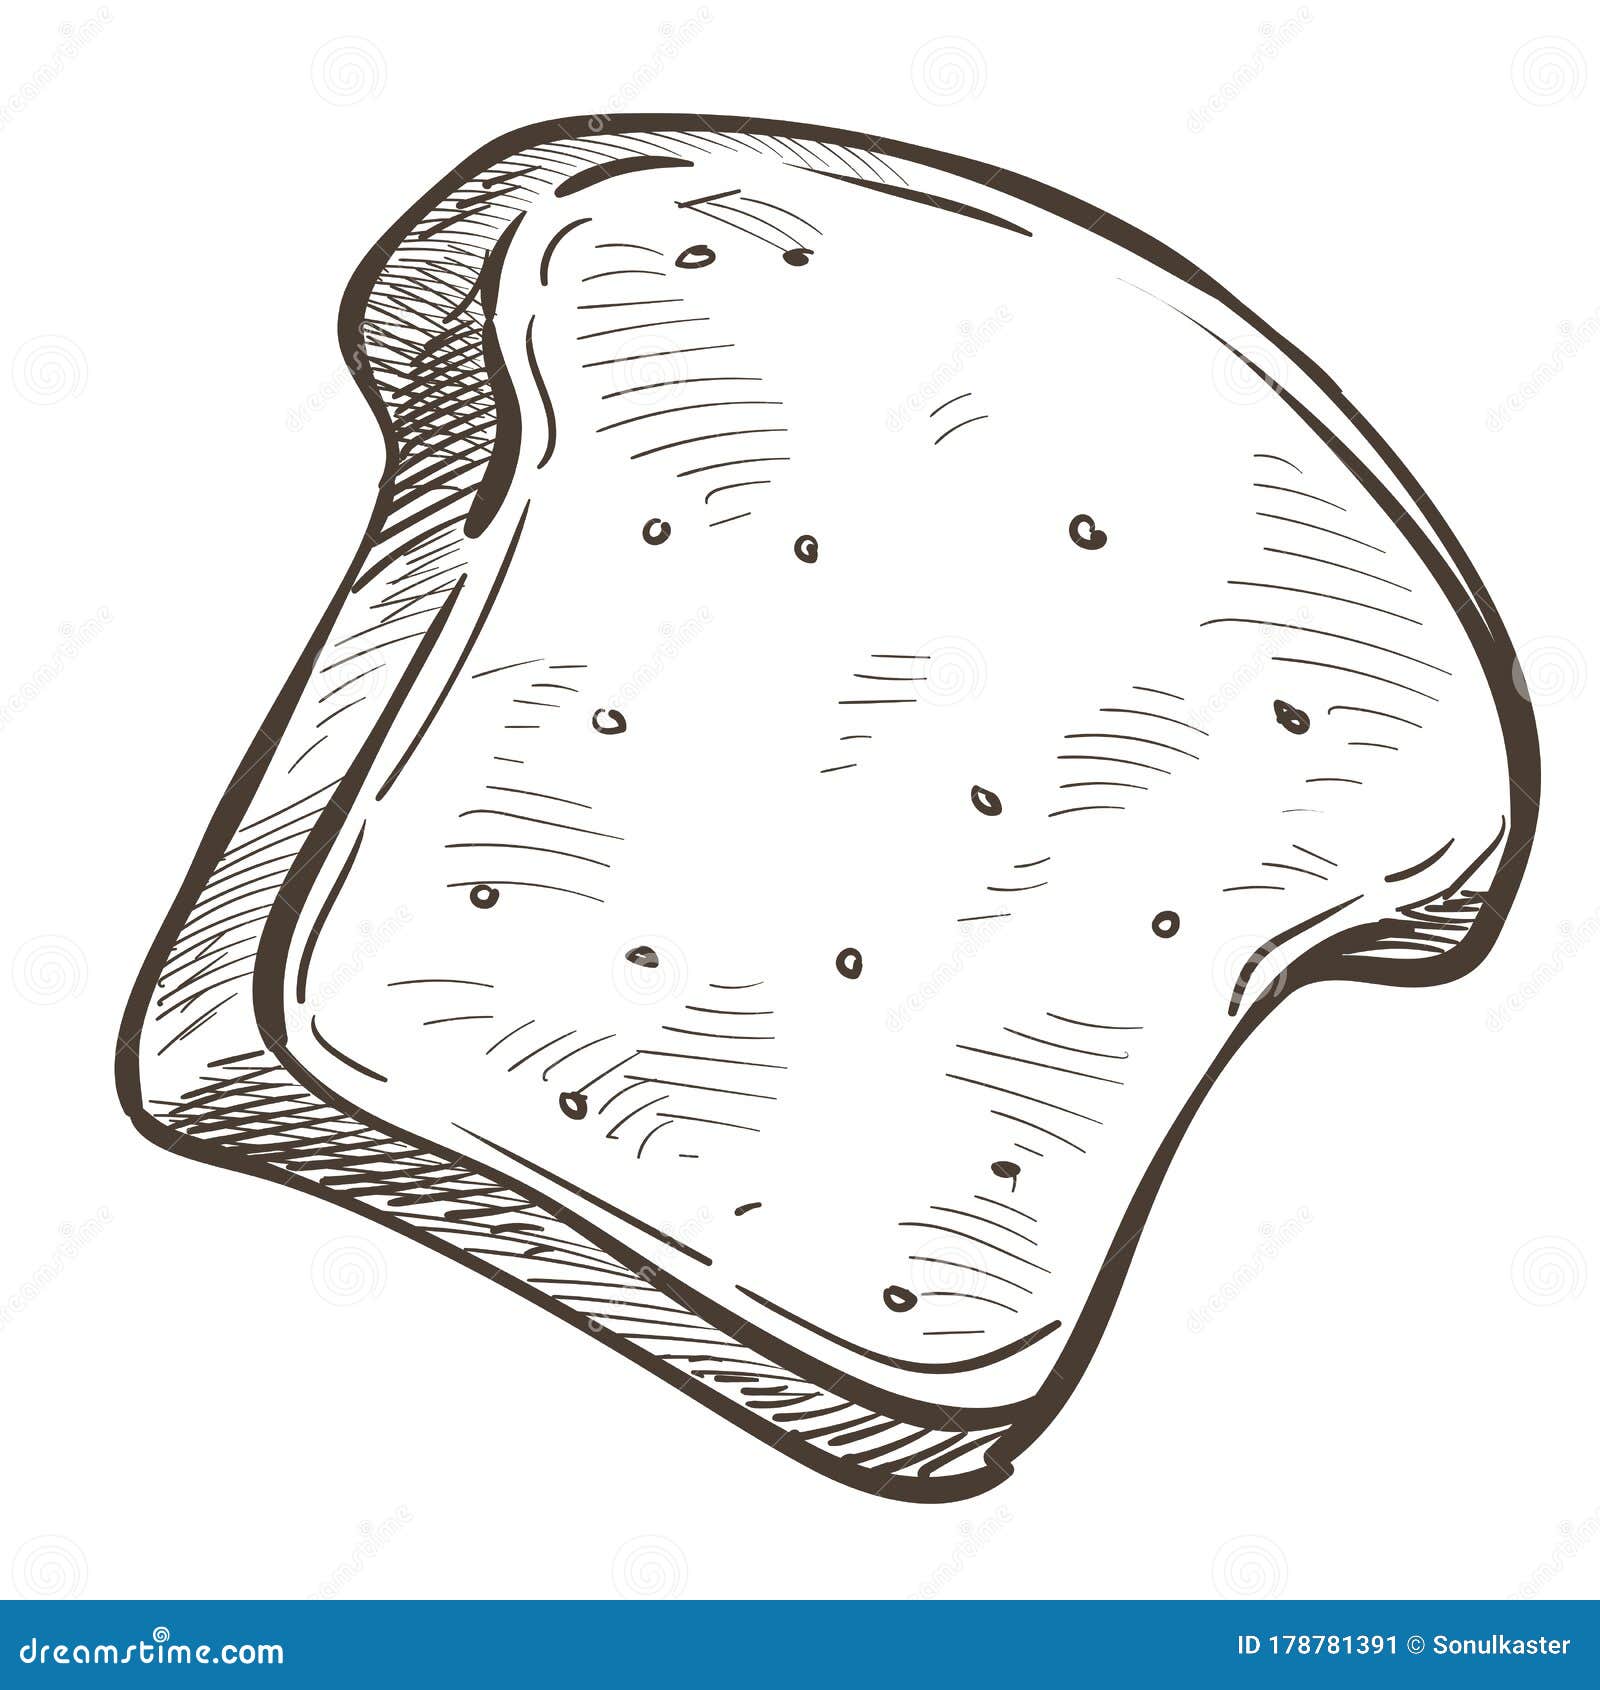 slice of bread outline clipart of betsy